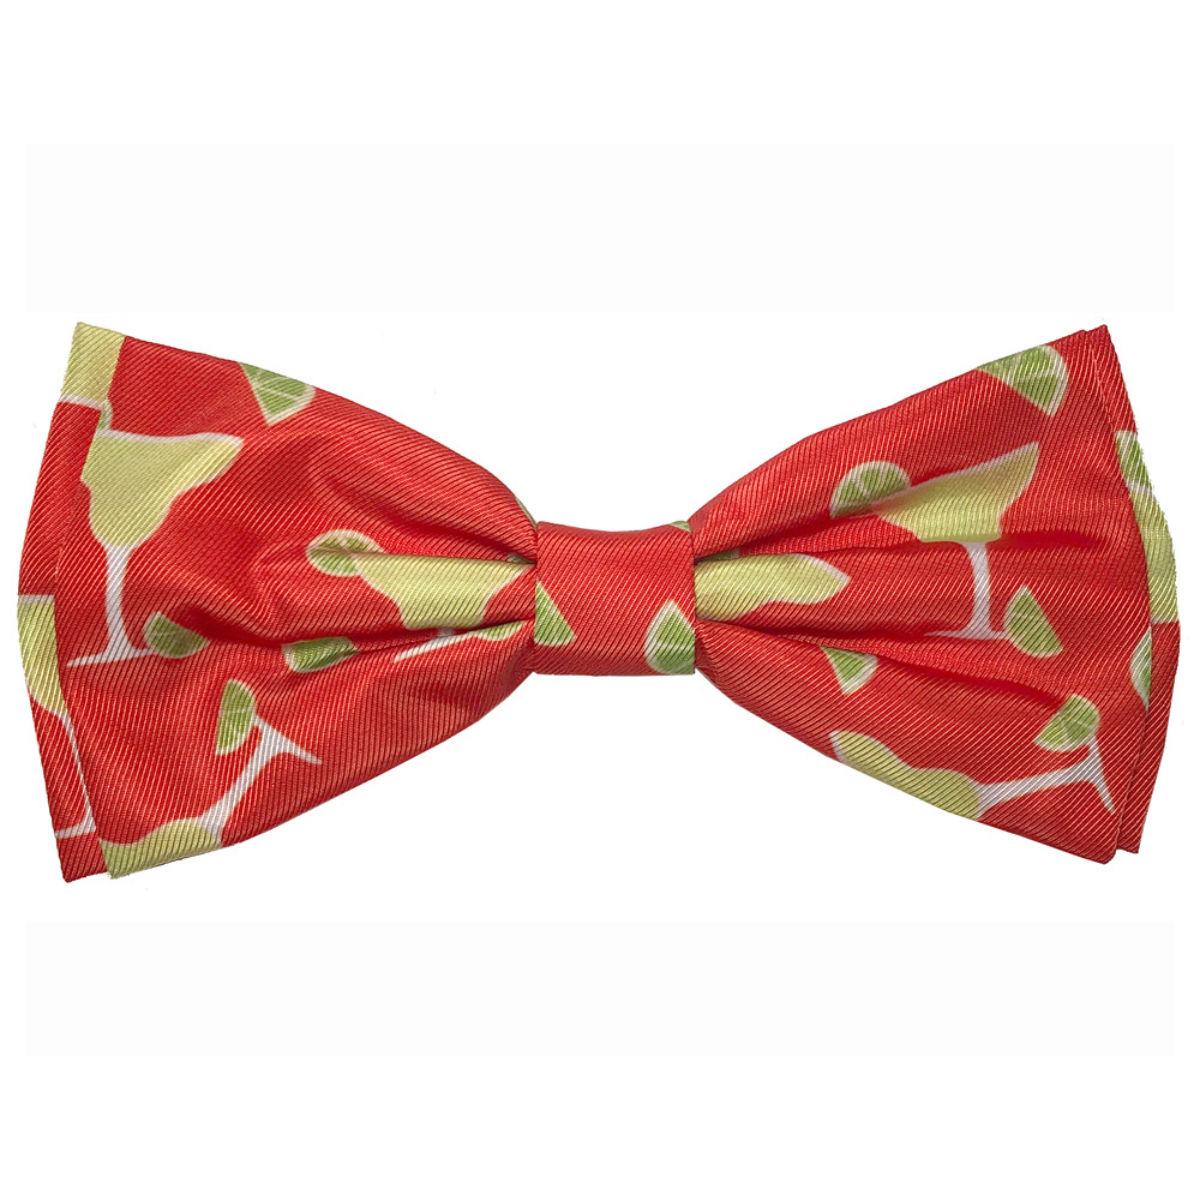 Huxley & Kent Dog and Cat Bow Tie Collar Attachment - Margarita